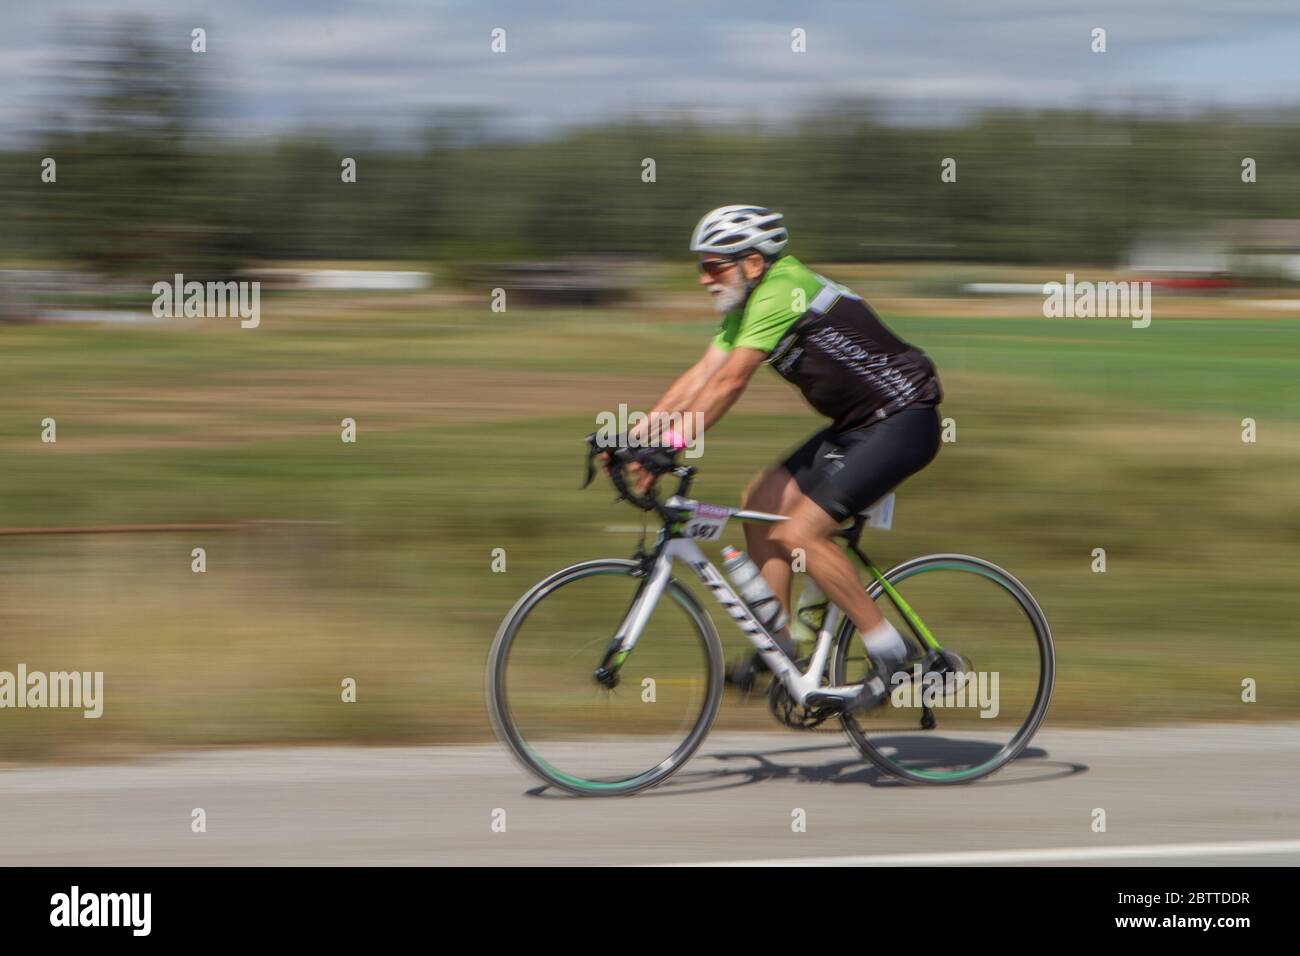 Scenic Bike Race, single rider, in full racing gear and uniform. Blurred background. Stock Photo